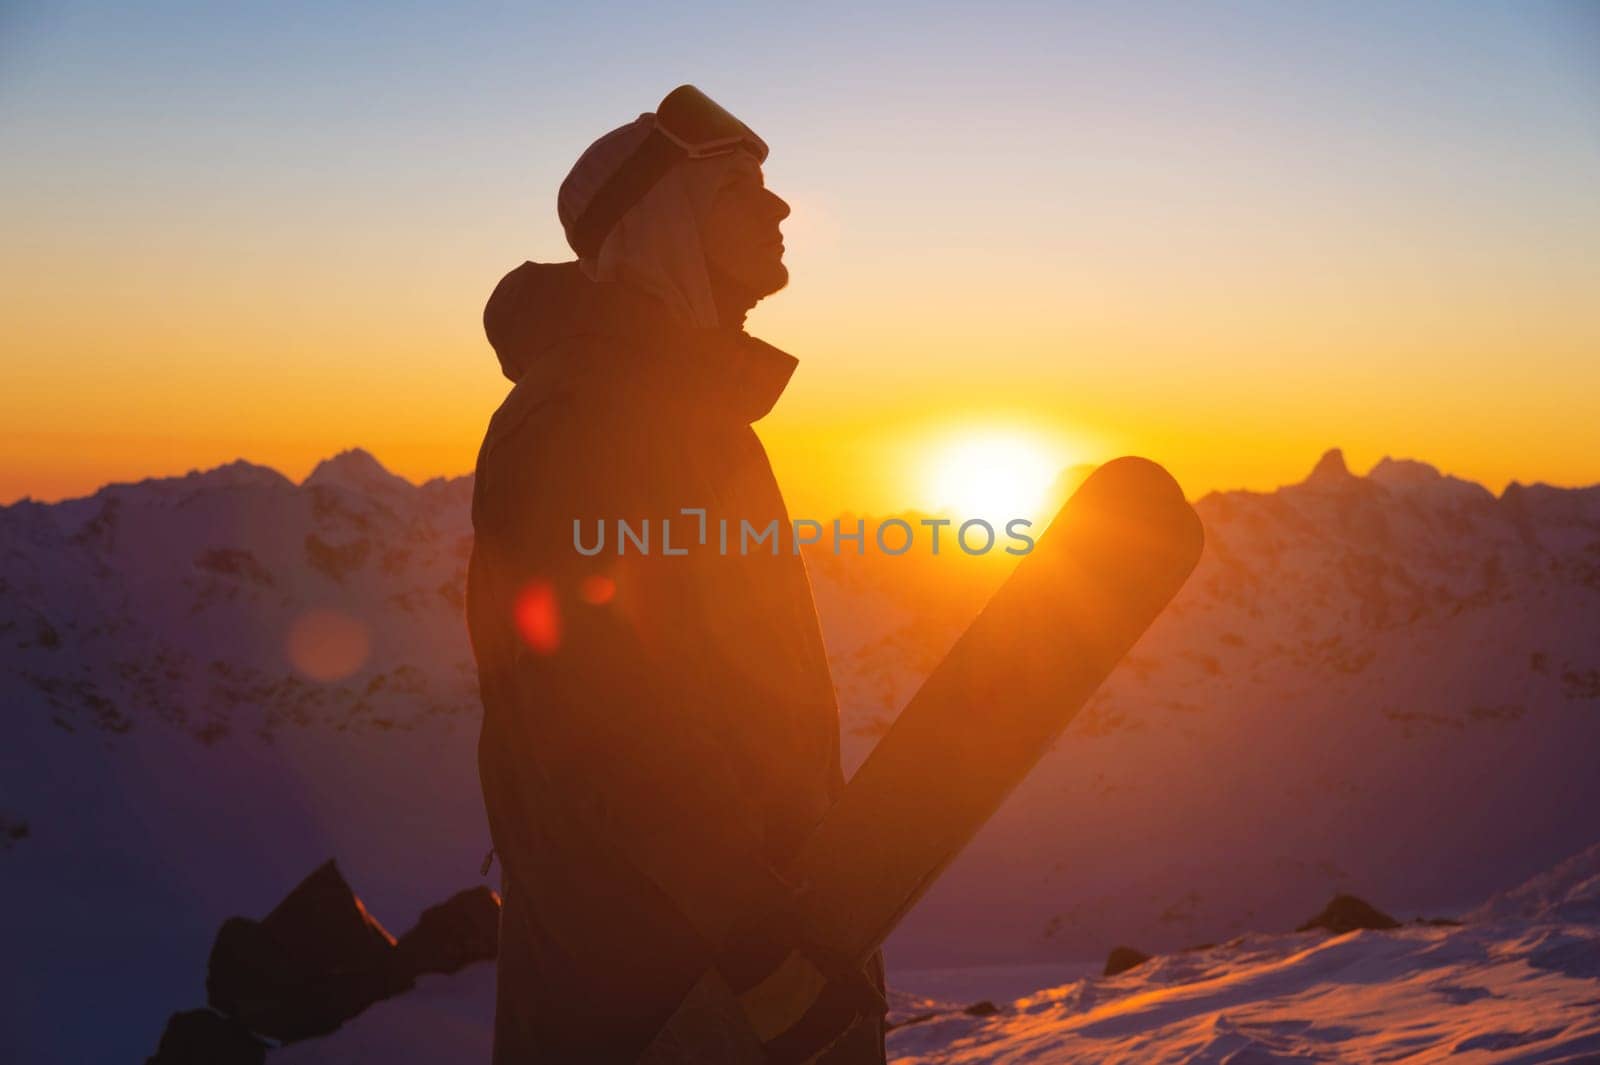 silhouette of a skier with skis standing on a slope at sunset against a mountain range. sportsman portrait.